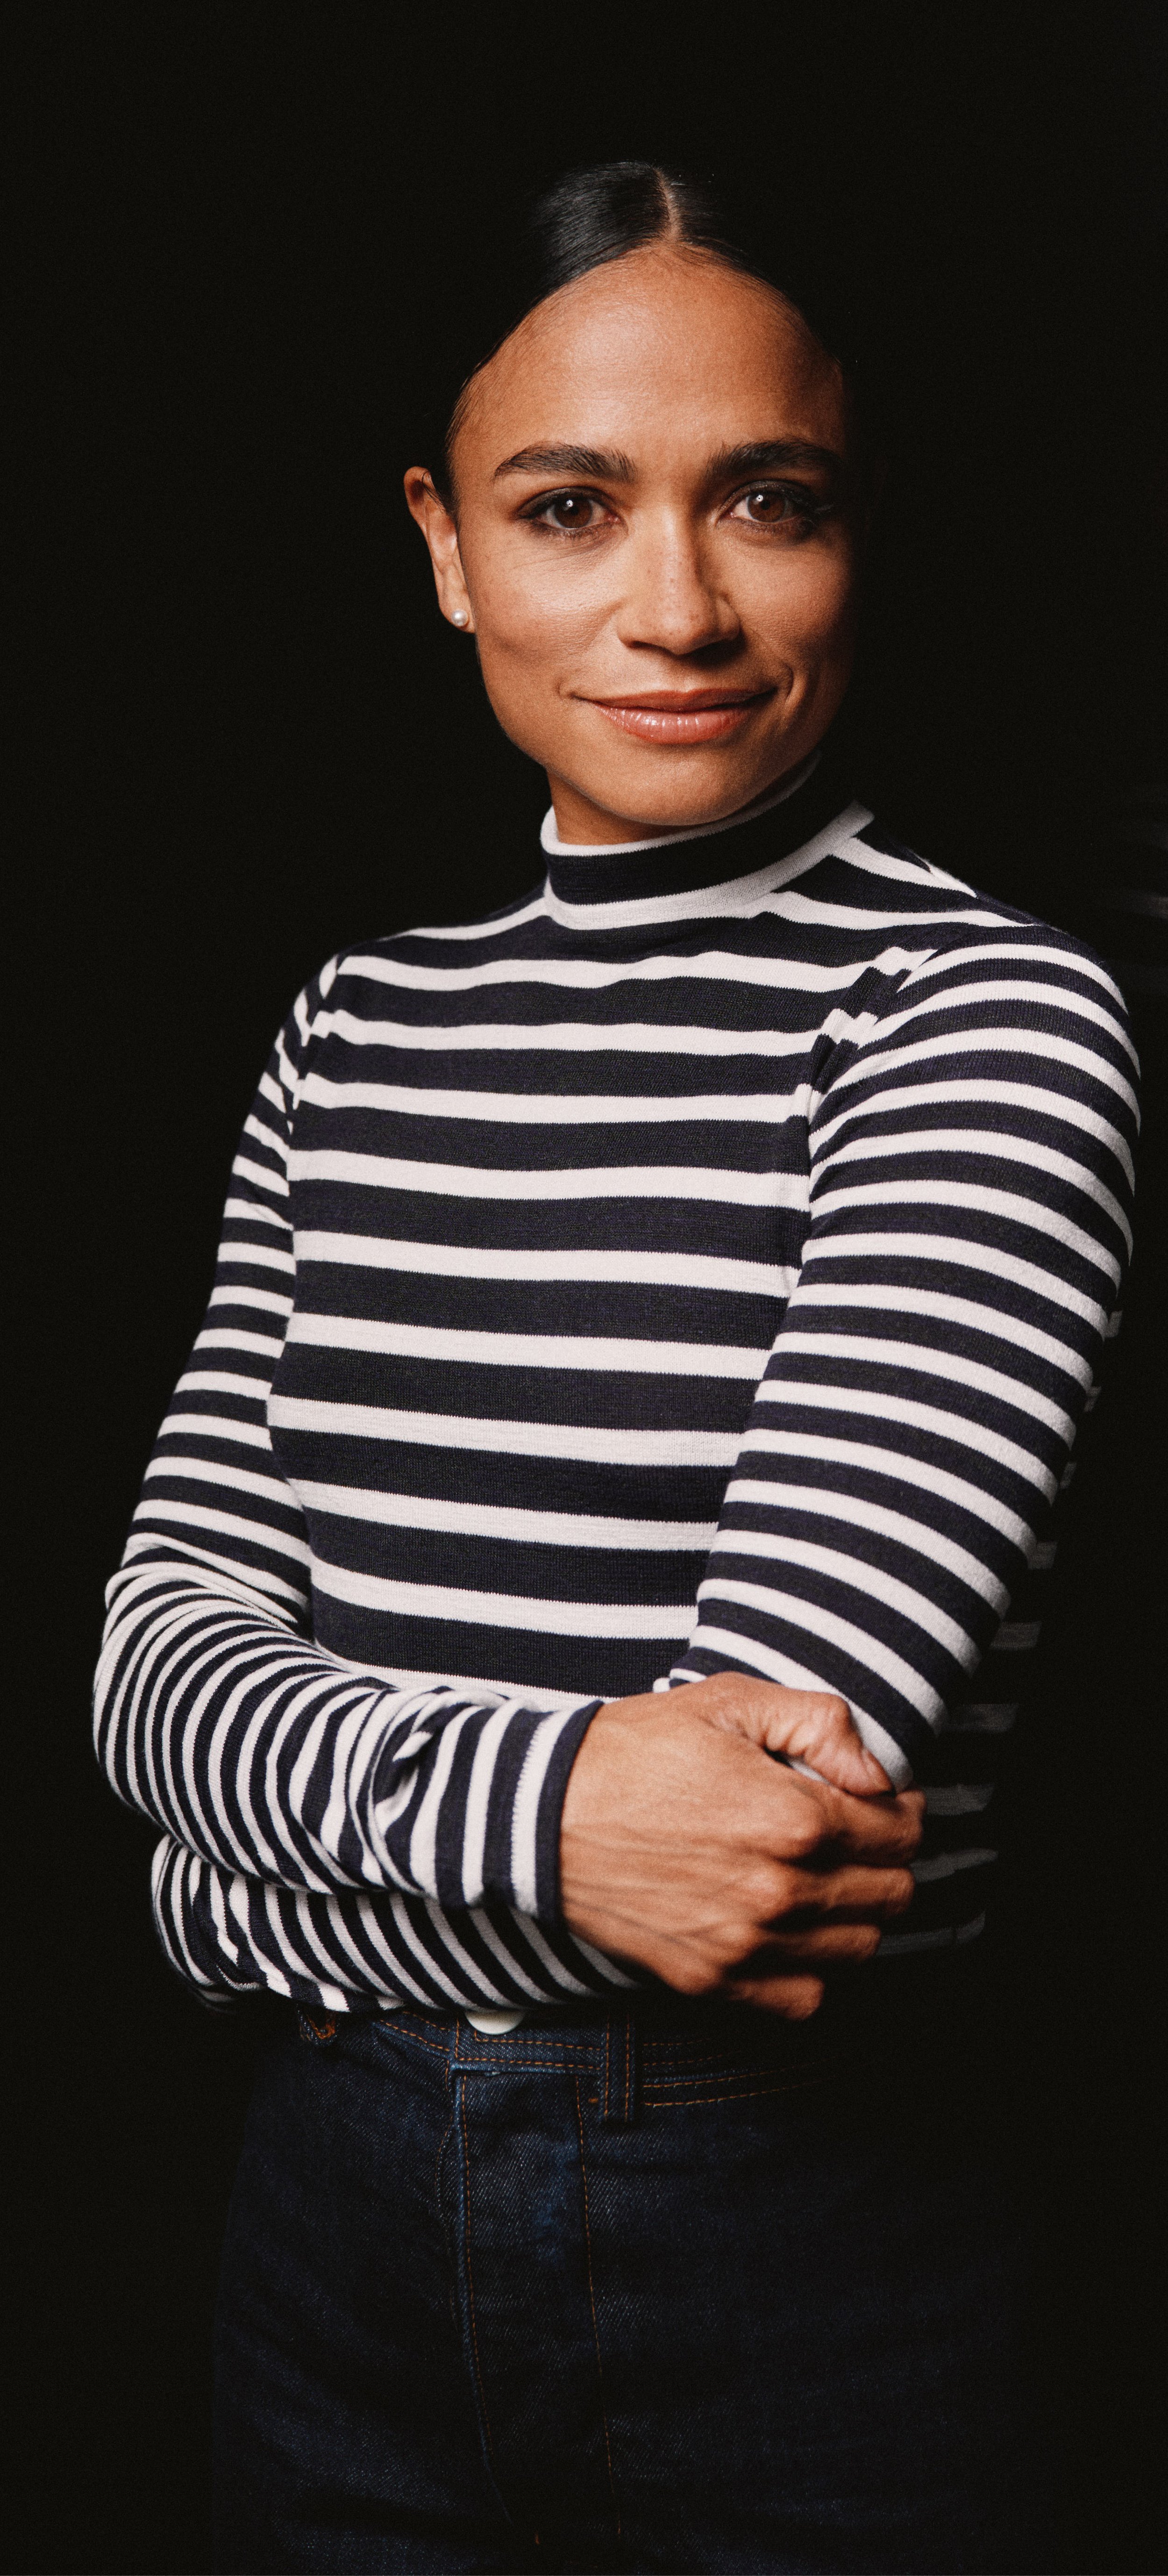 A light skinned Black and Mexican American woman with slicked back black hair, wearing a black and white striped low turtleneck sweater and dark blue jeans, smiling.